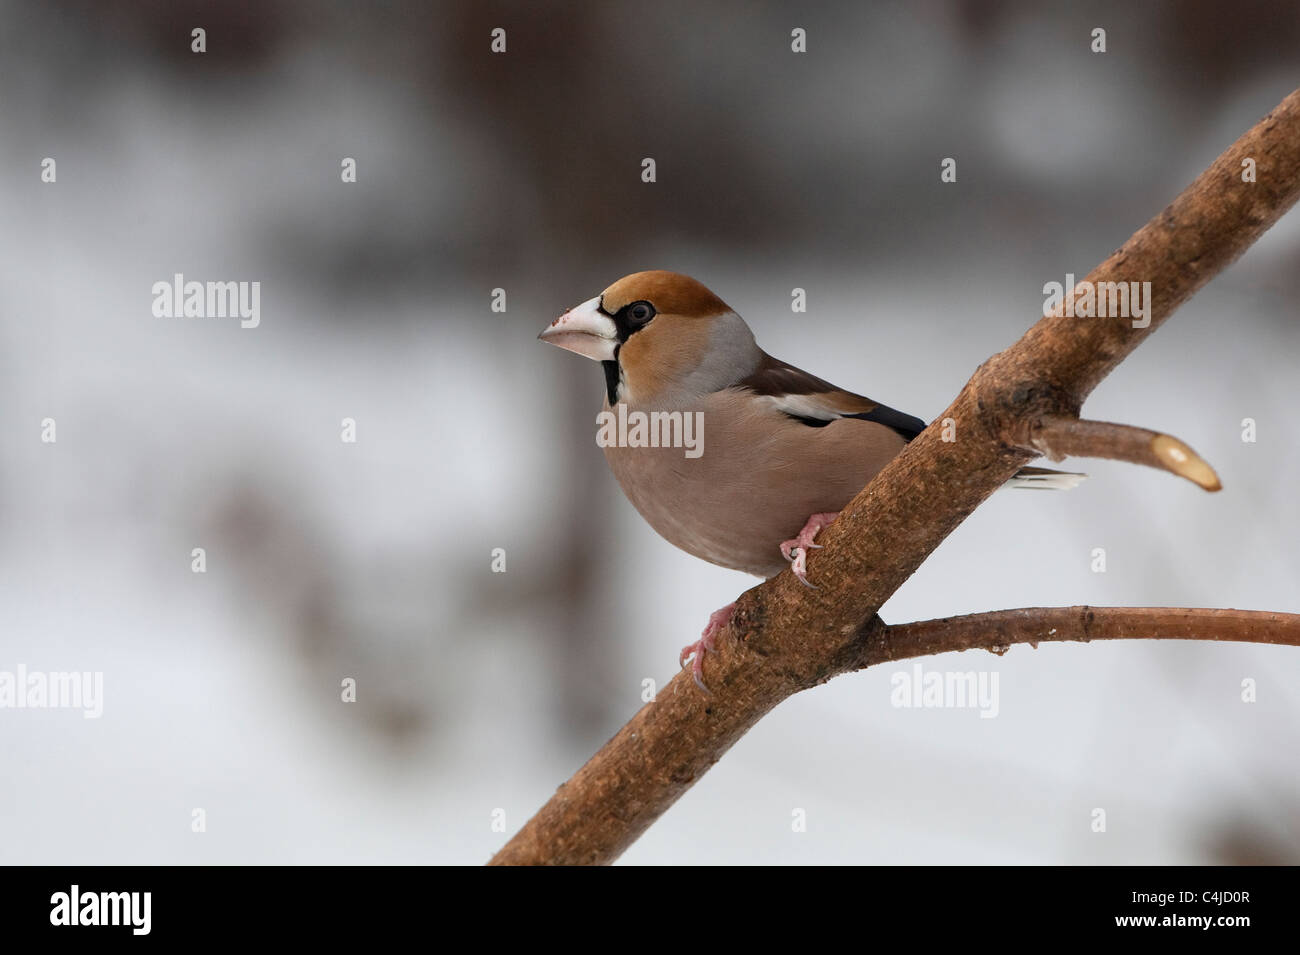 Hawfinch (Coccothraustes coccothraustes) perched on branch Stock Photo